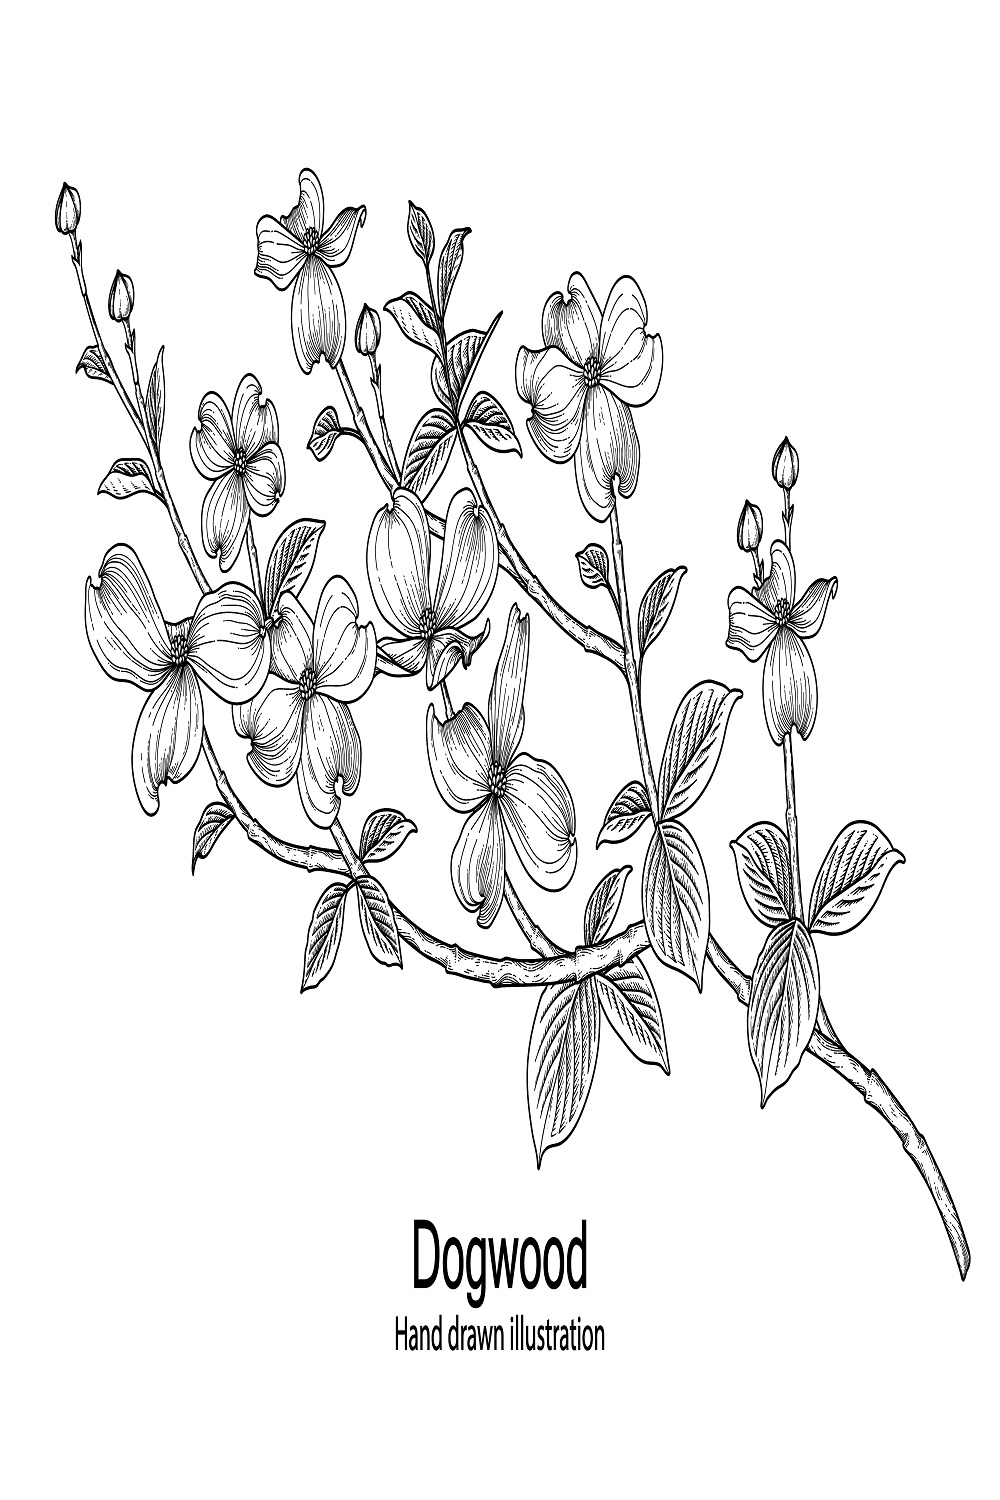 Dogwood flower drawings pinterest preview image.